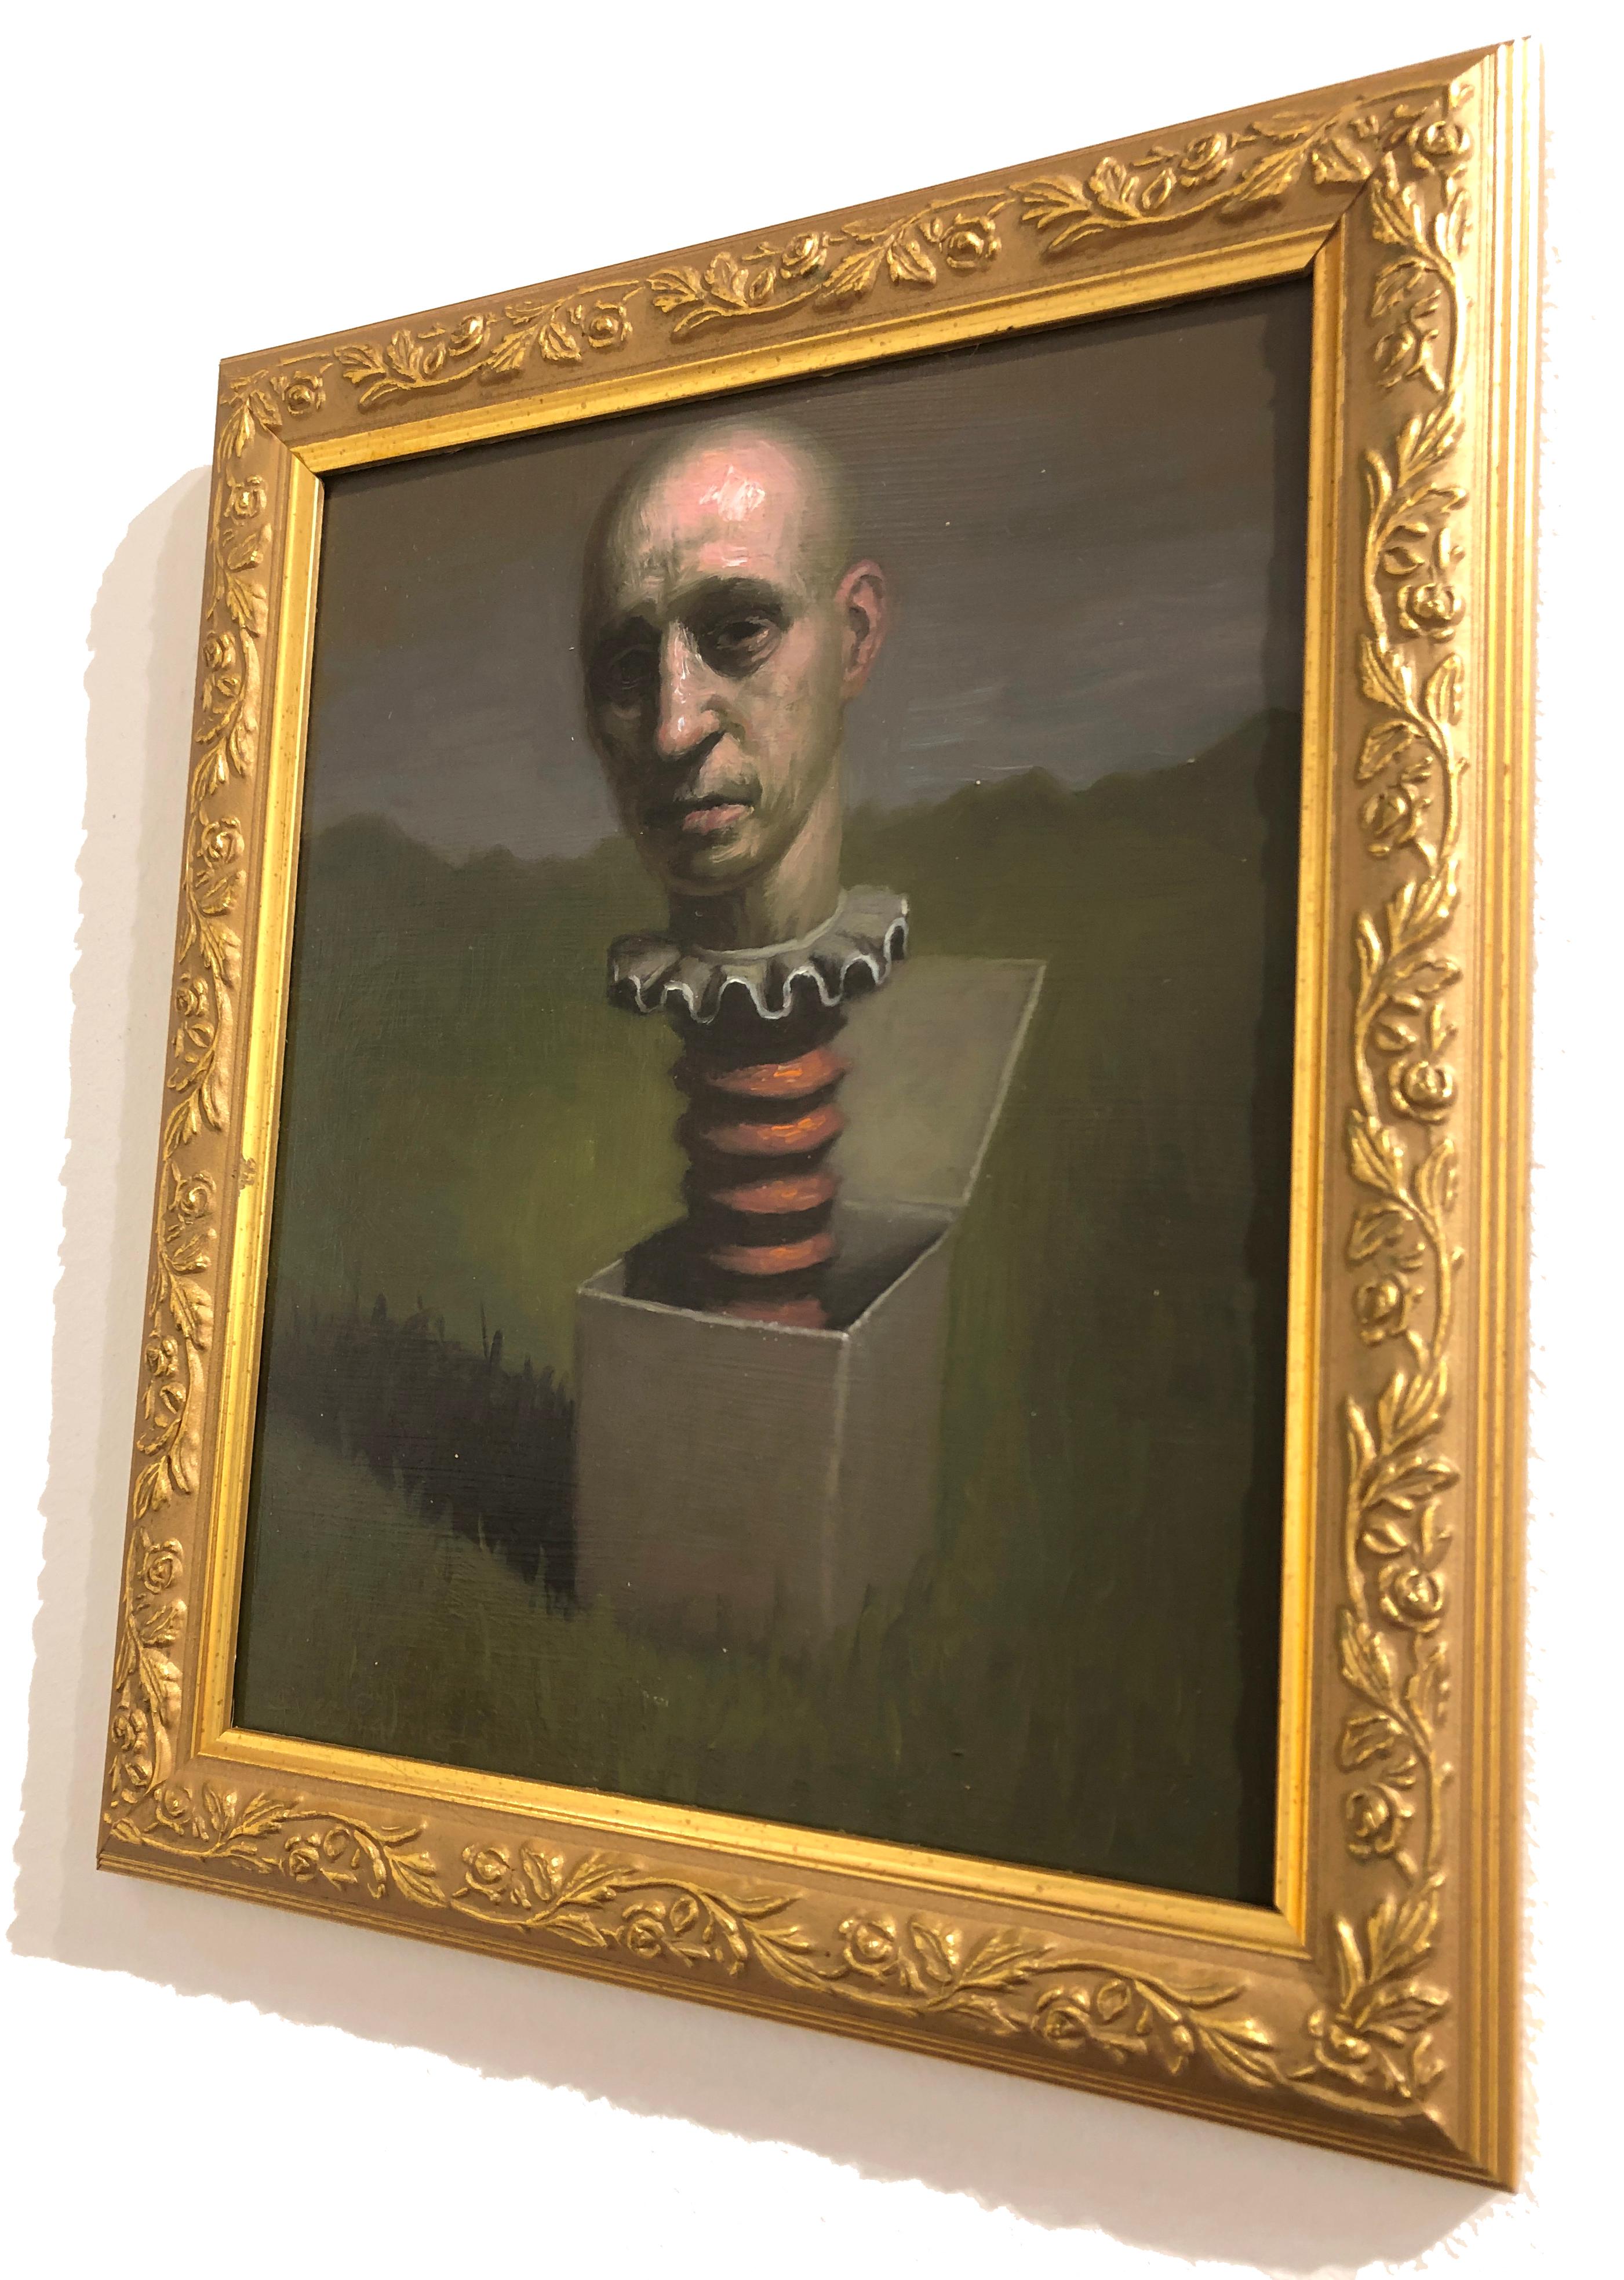 Man Thinking Outside the Box, Avery Palmer, Oil on board, pop surreal figure 3